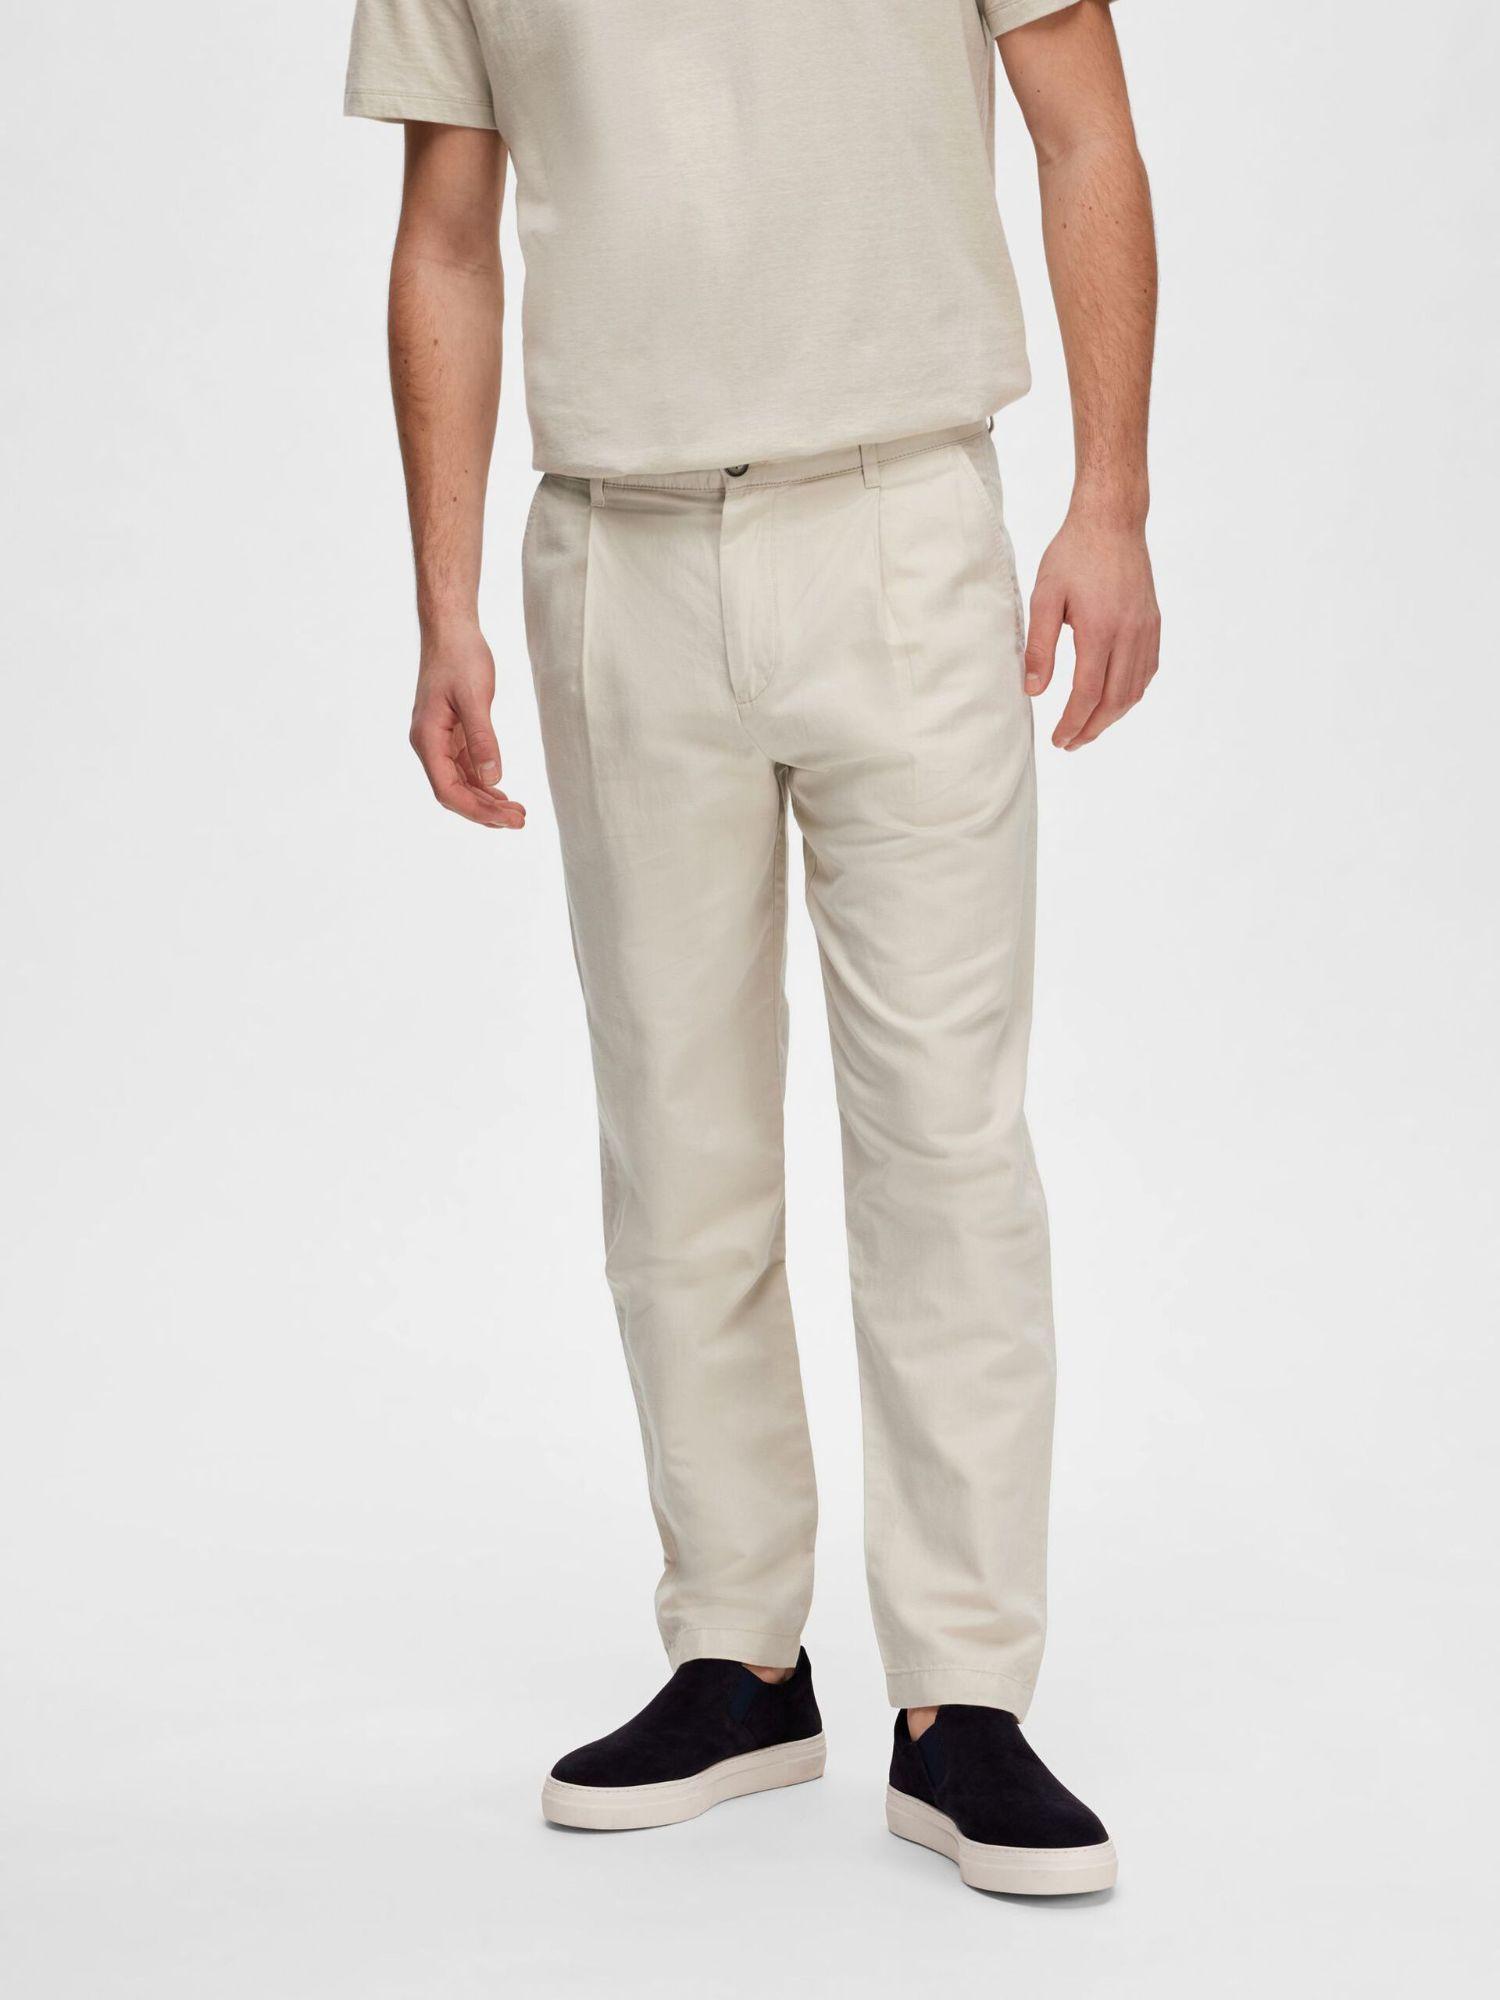 solid casual beige pants